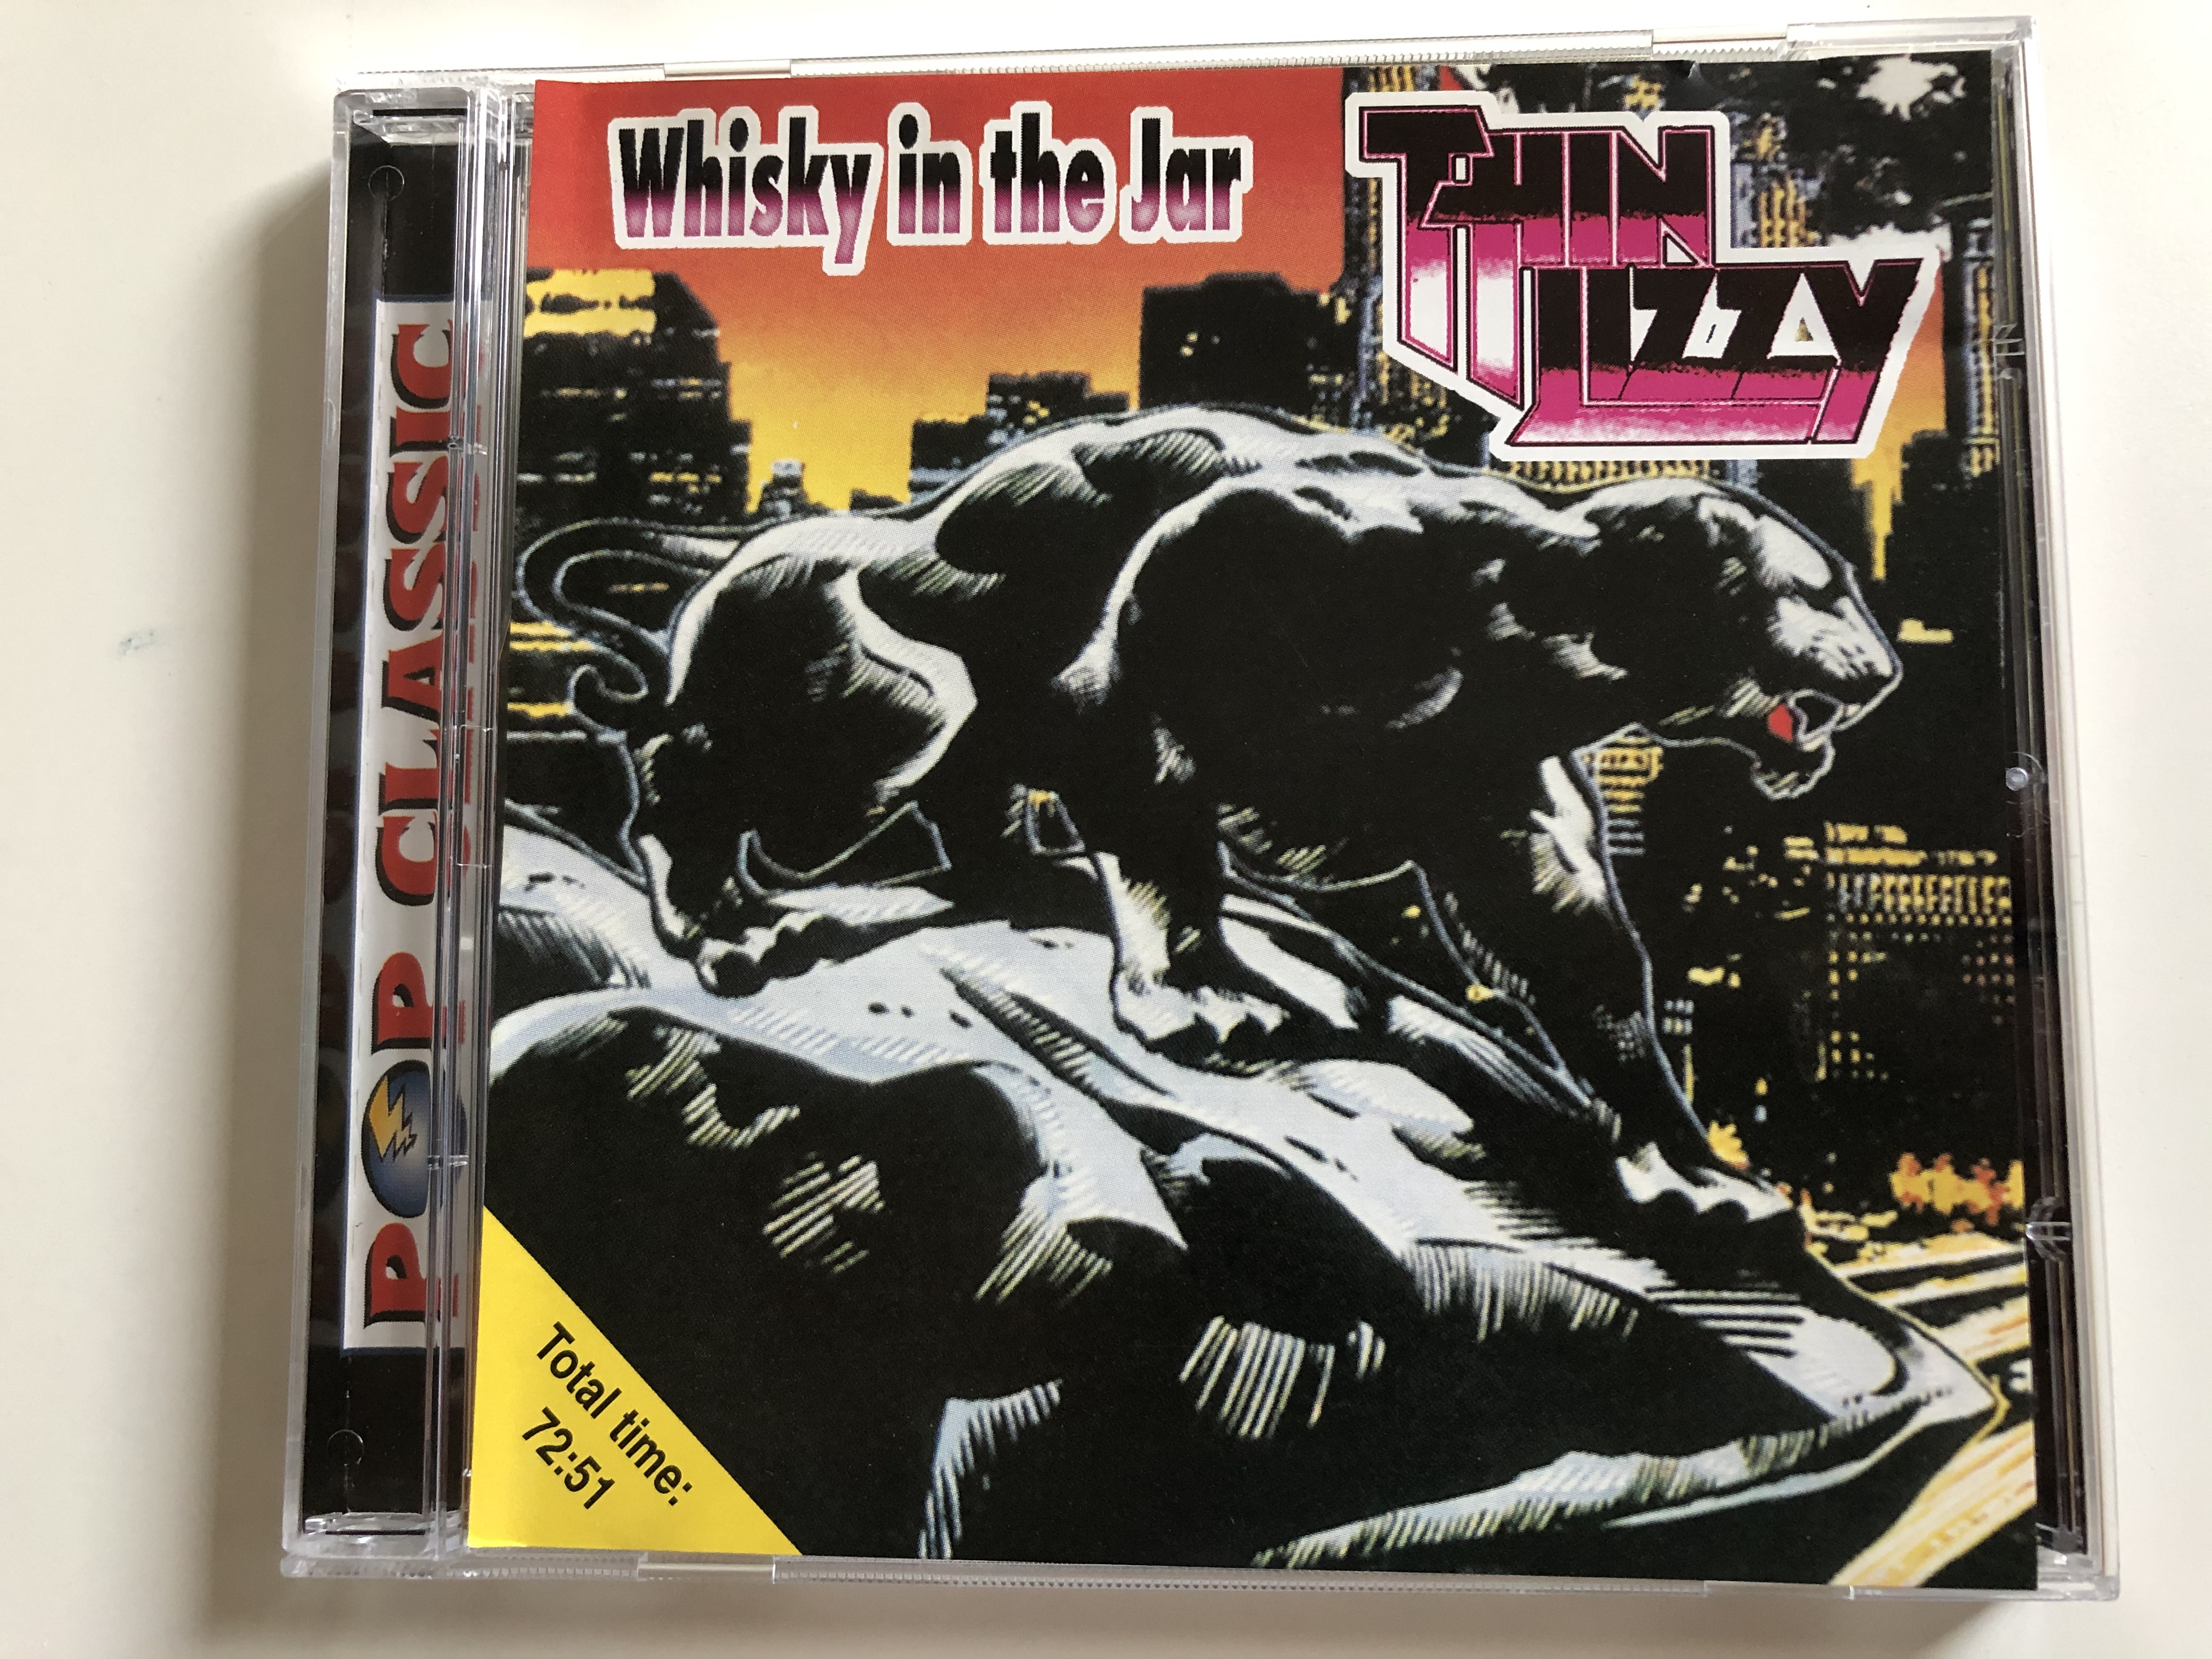 whisky-in-the-jar-thin-lizzy-total-time-7251-pop-classic-euroton-audio-cd-eucd-0024-1-.jpg